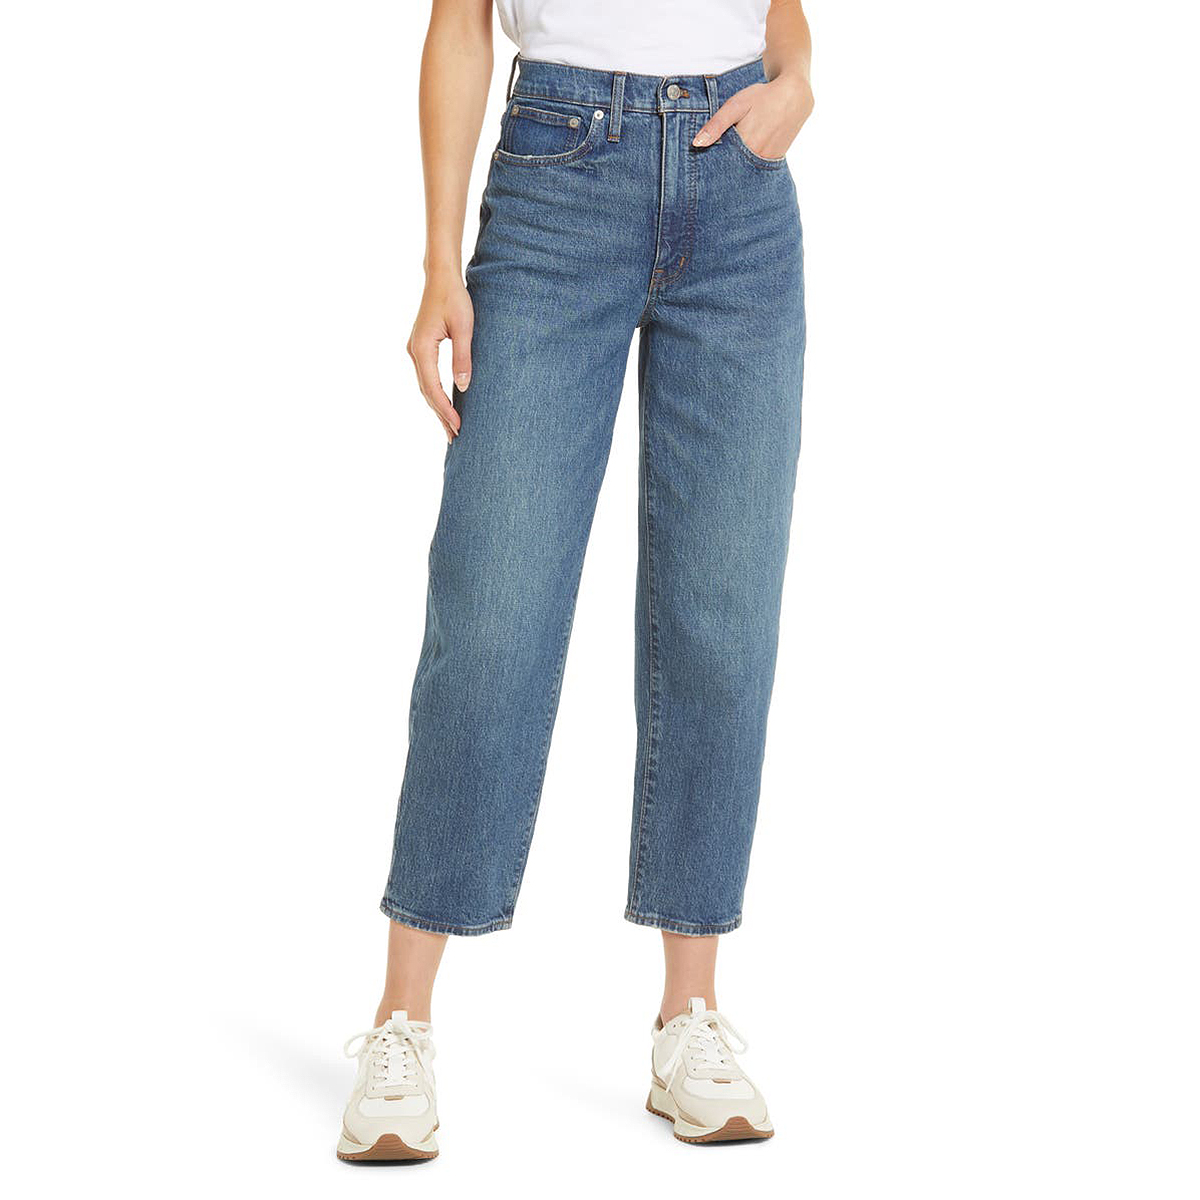 nordstrom-winter-sale-madewell-jeans